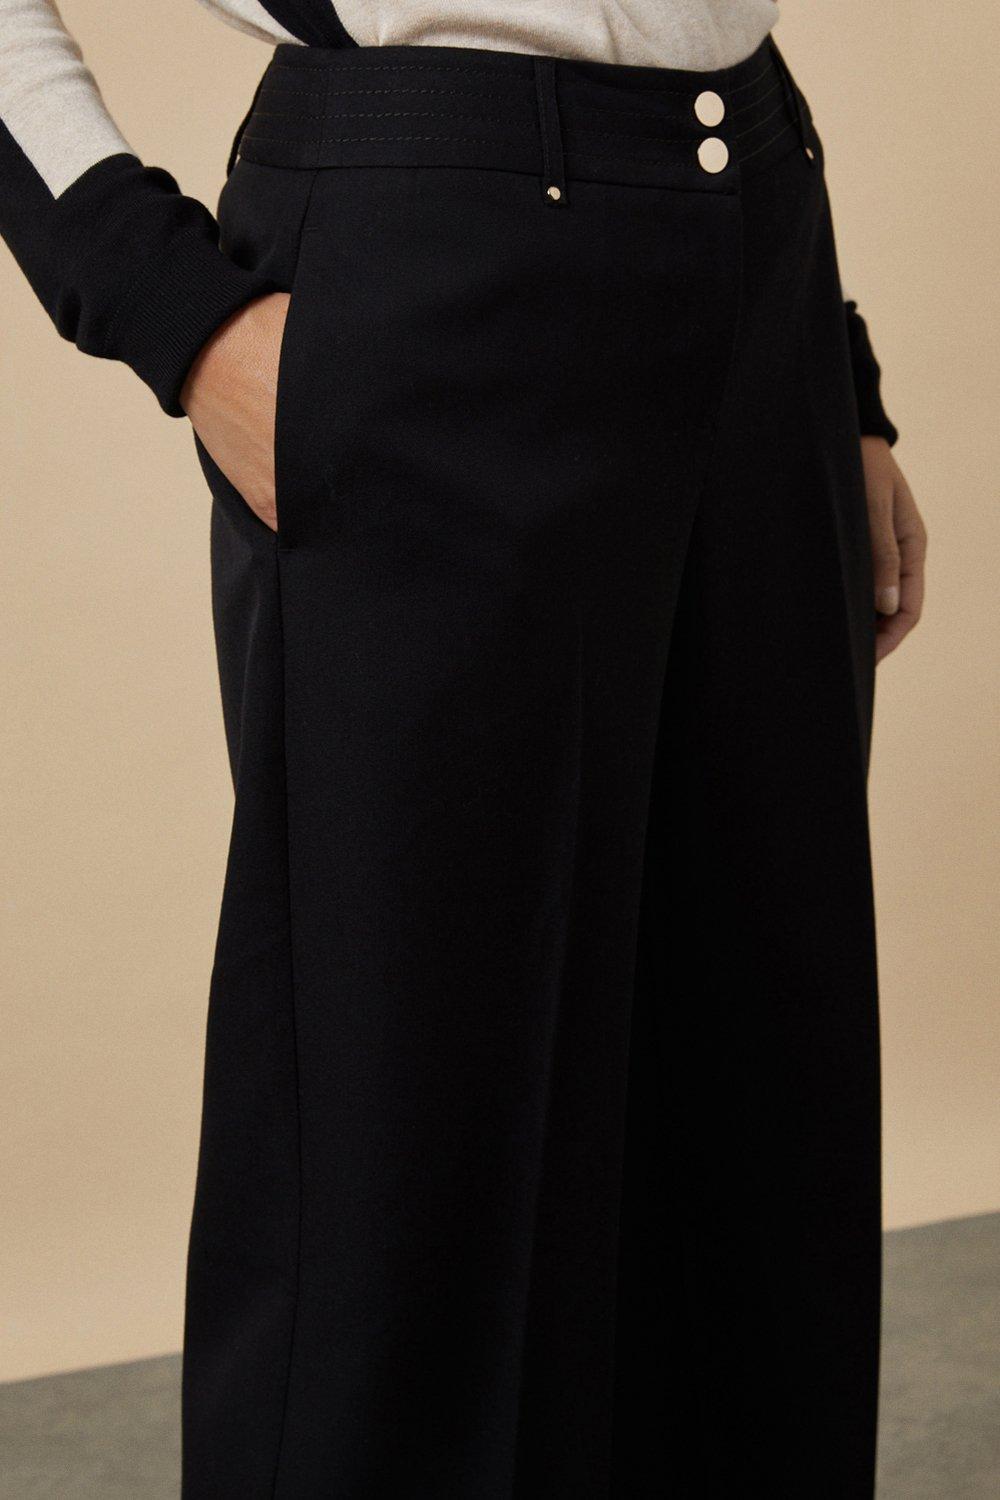 Buy Lipsy Black Petite Wide Leg Woven Smart Trousers from Next Luxembourg